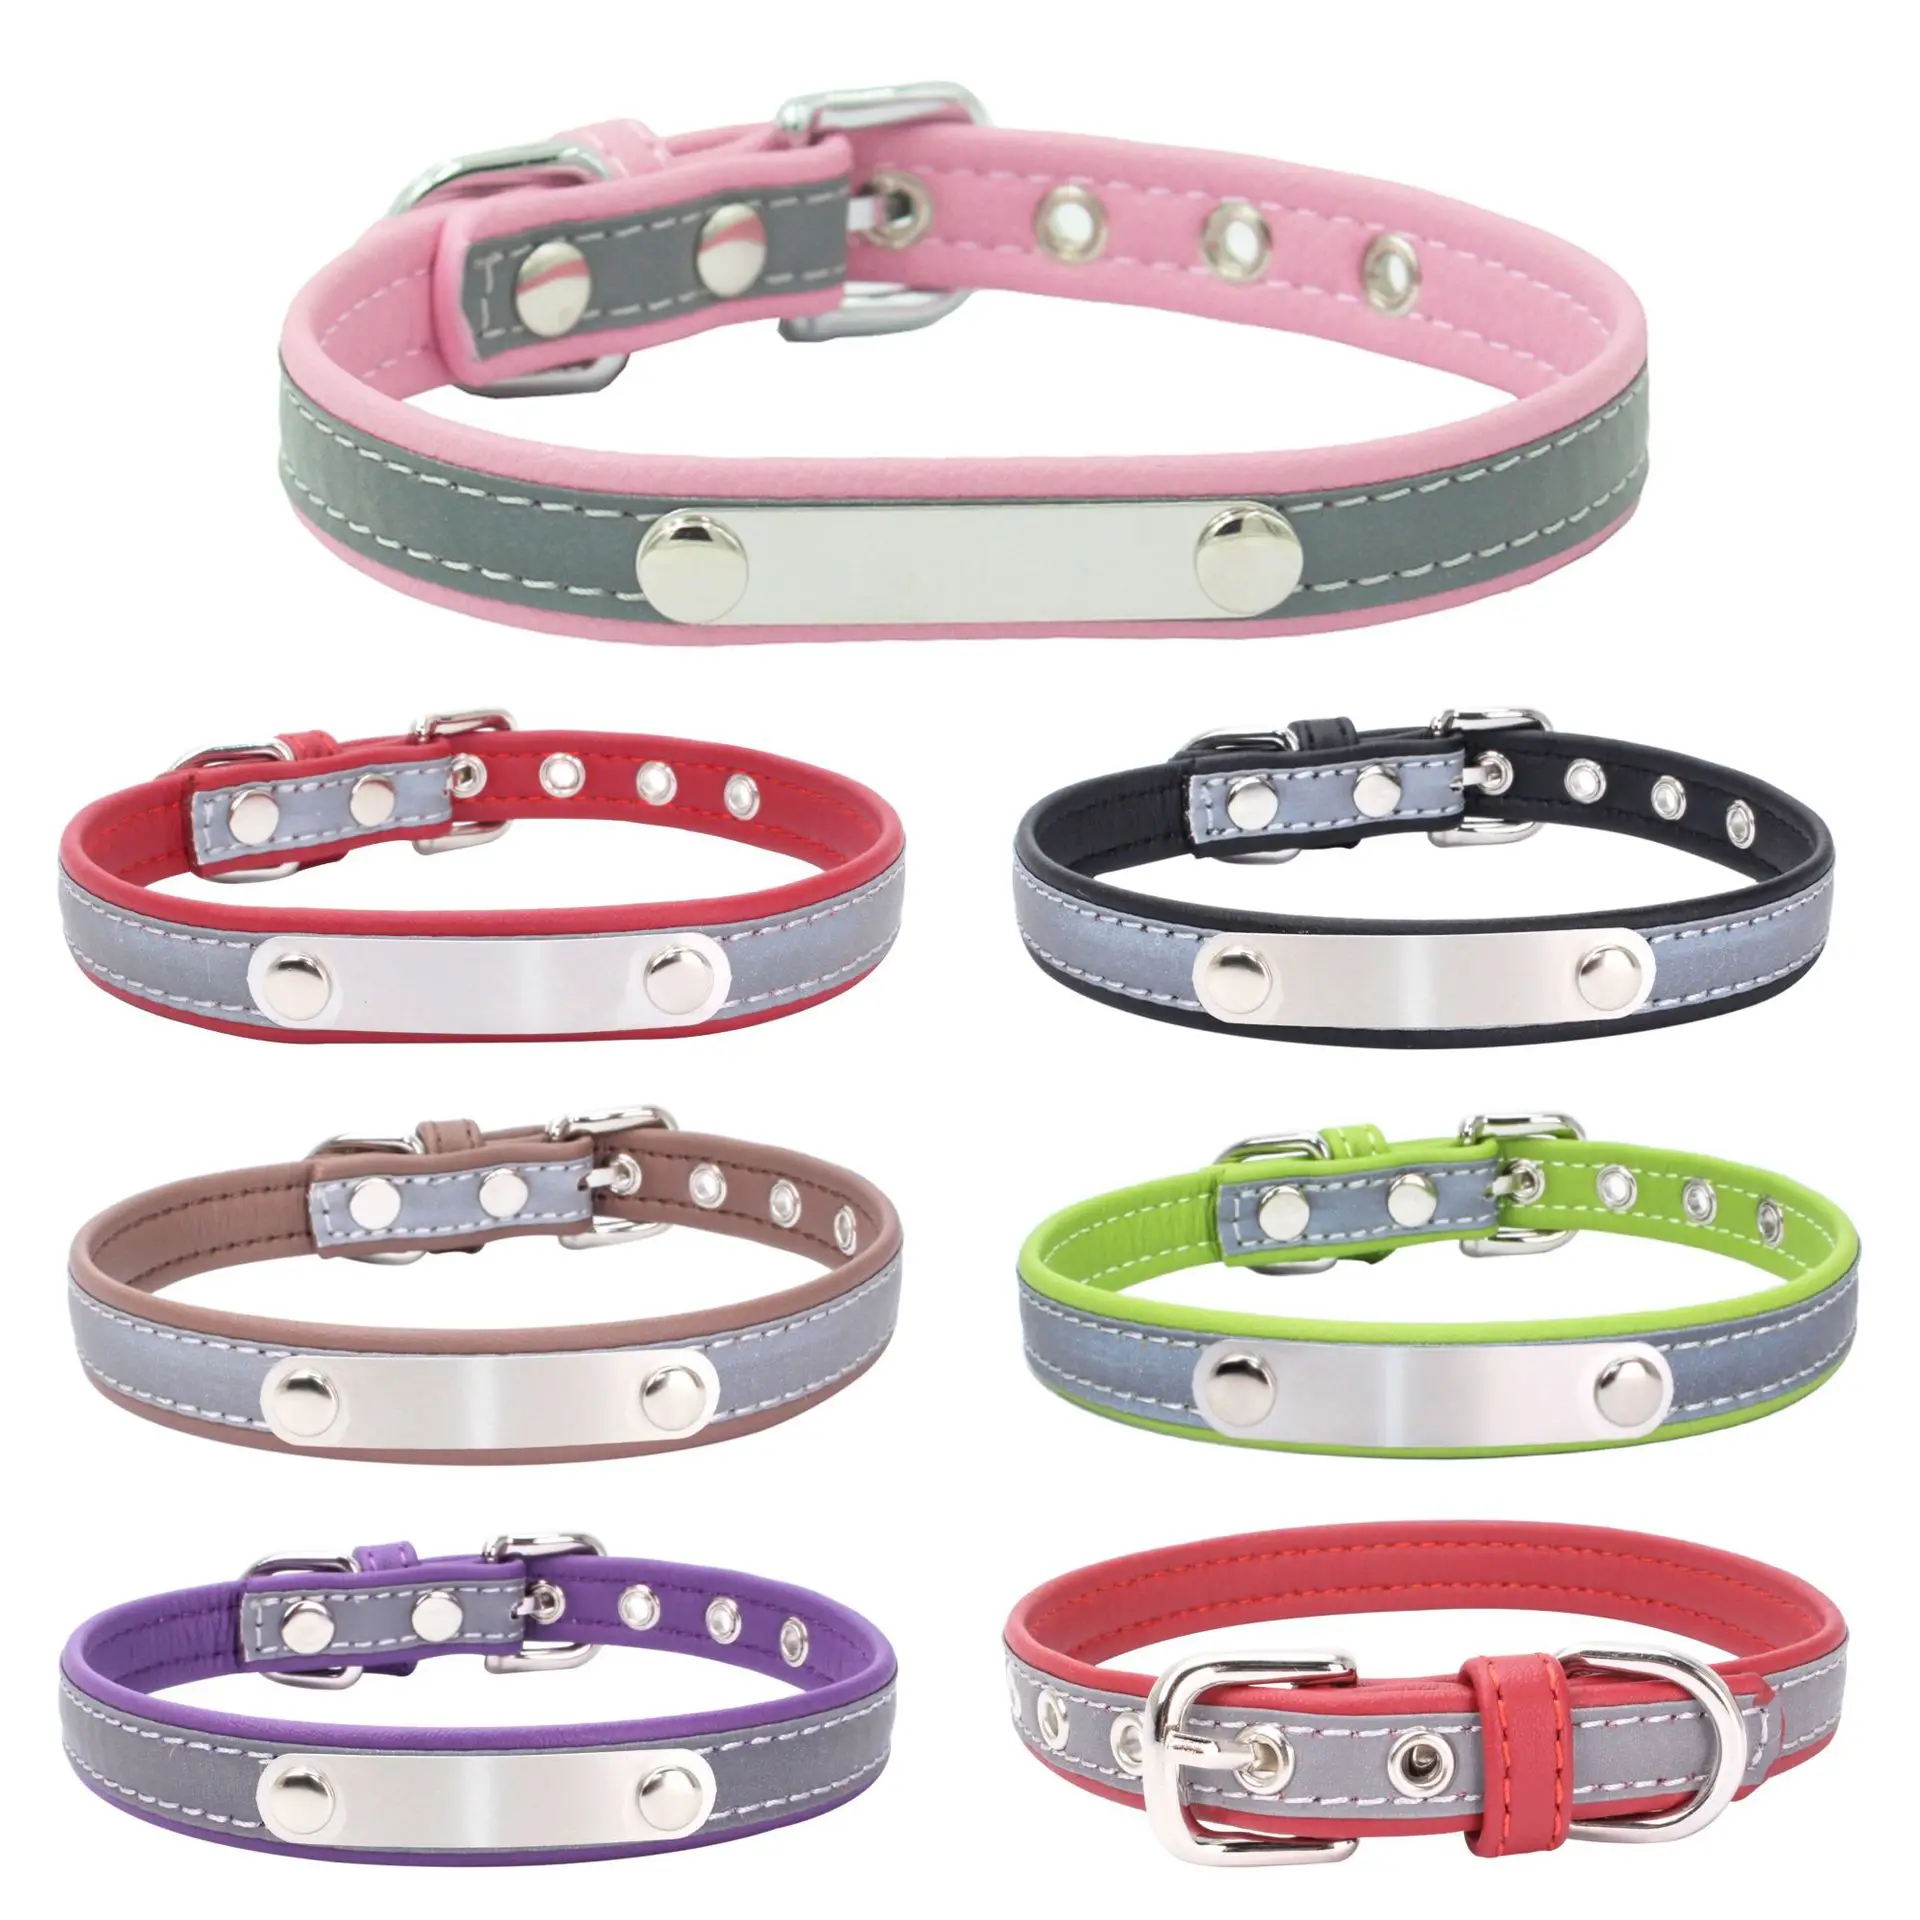 Reflective Dog Collar Pu Leather Collars For Small Dogs Chihuahua Yorkie SizeSML 